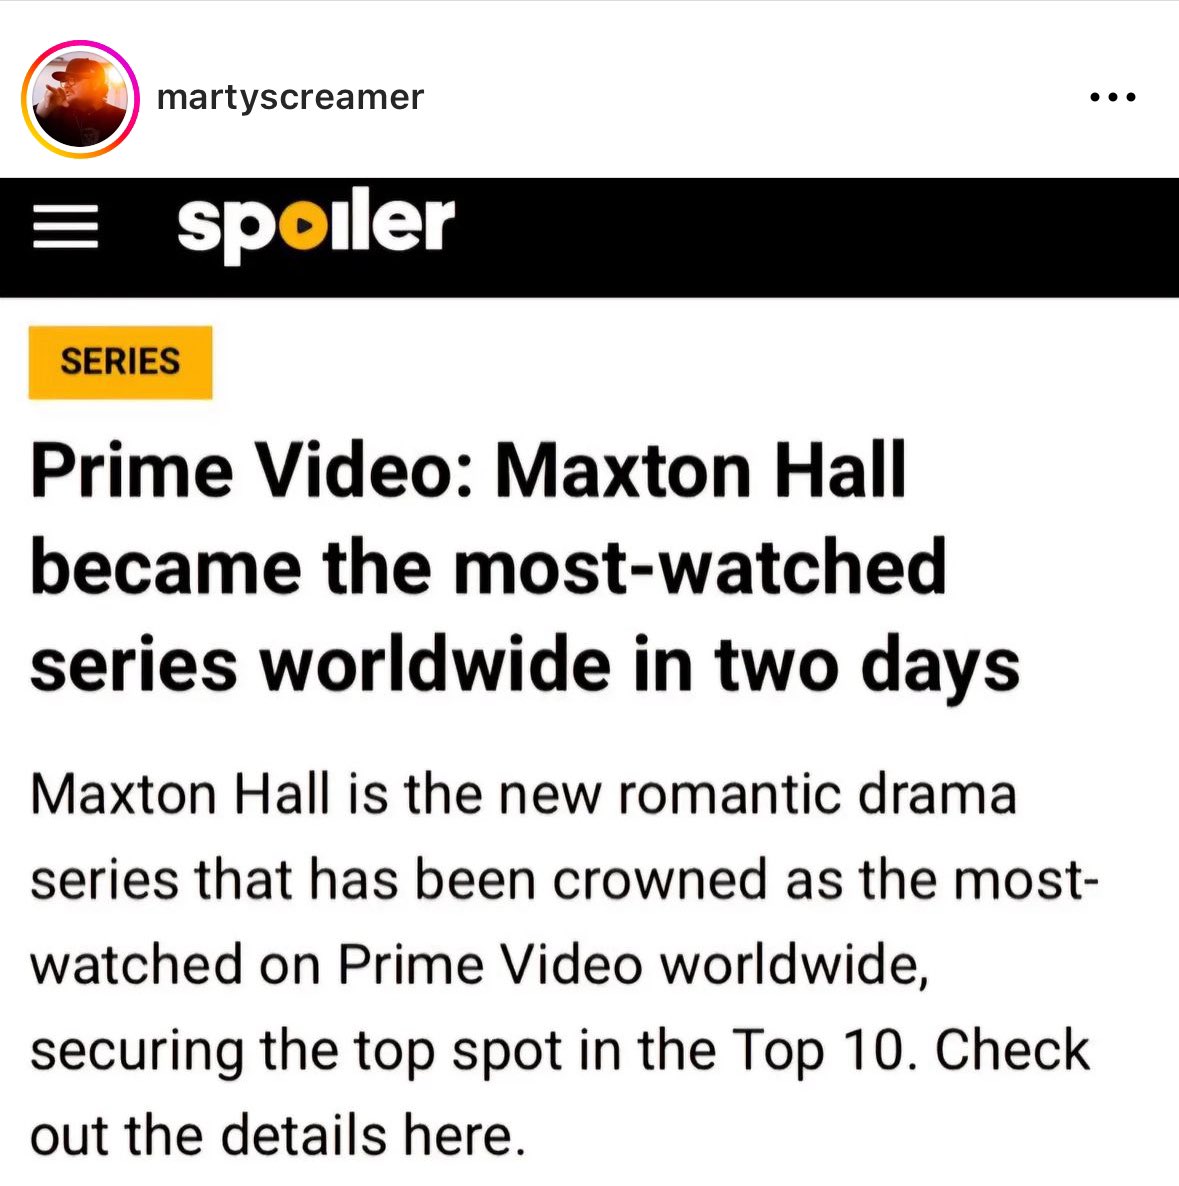 Yoooo the director just posted this 😱🙌 #MaxtonHall